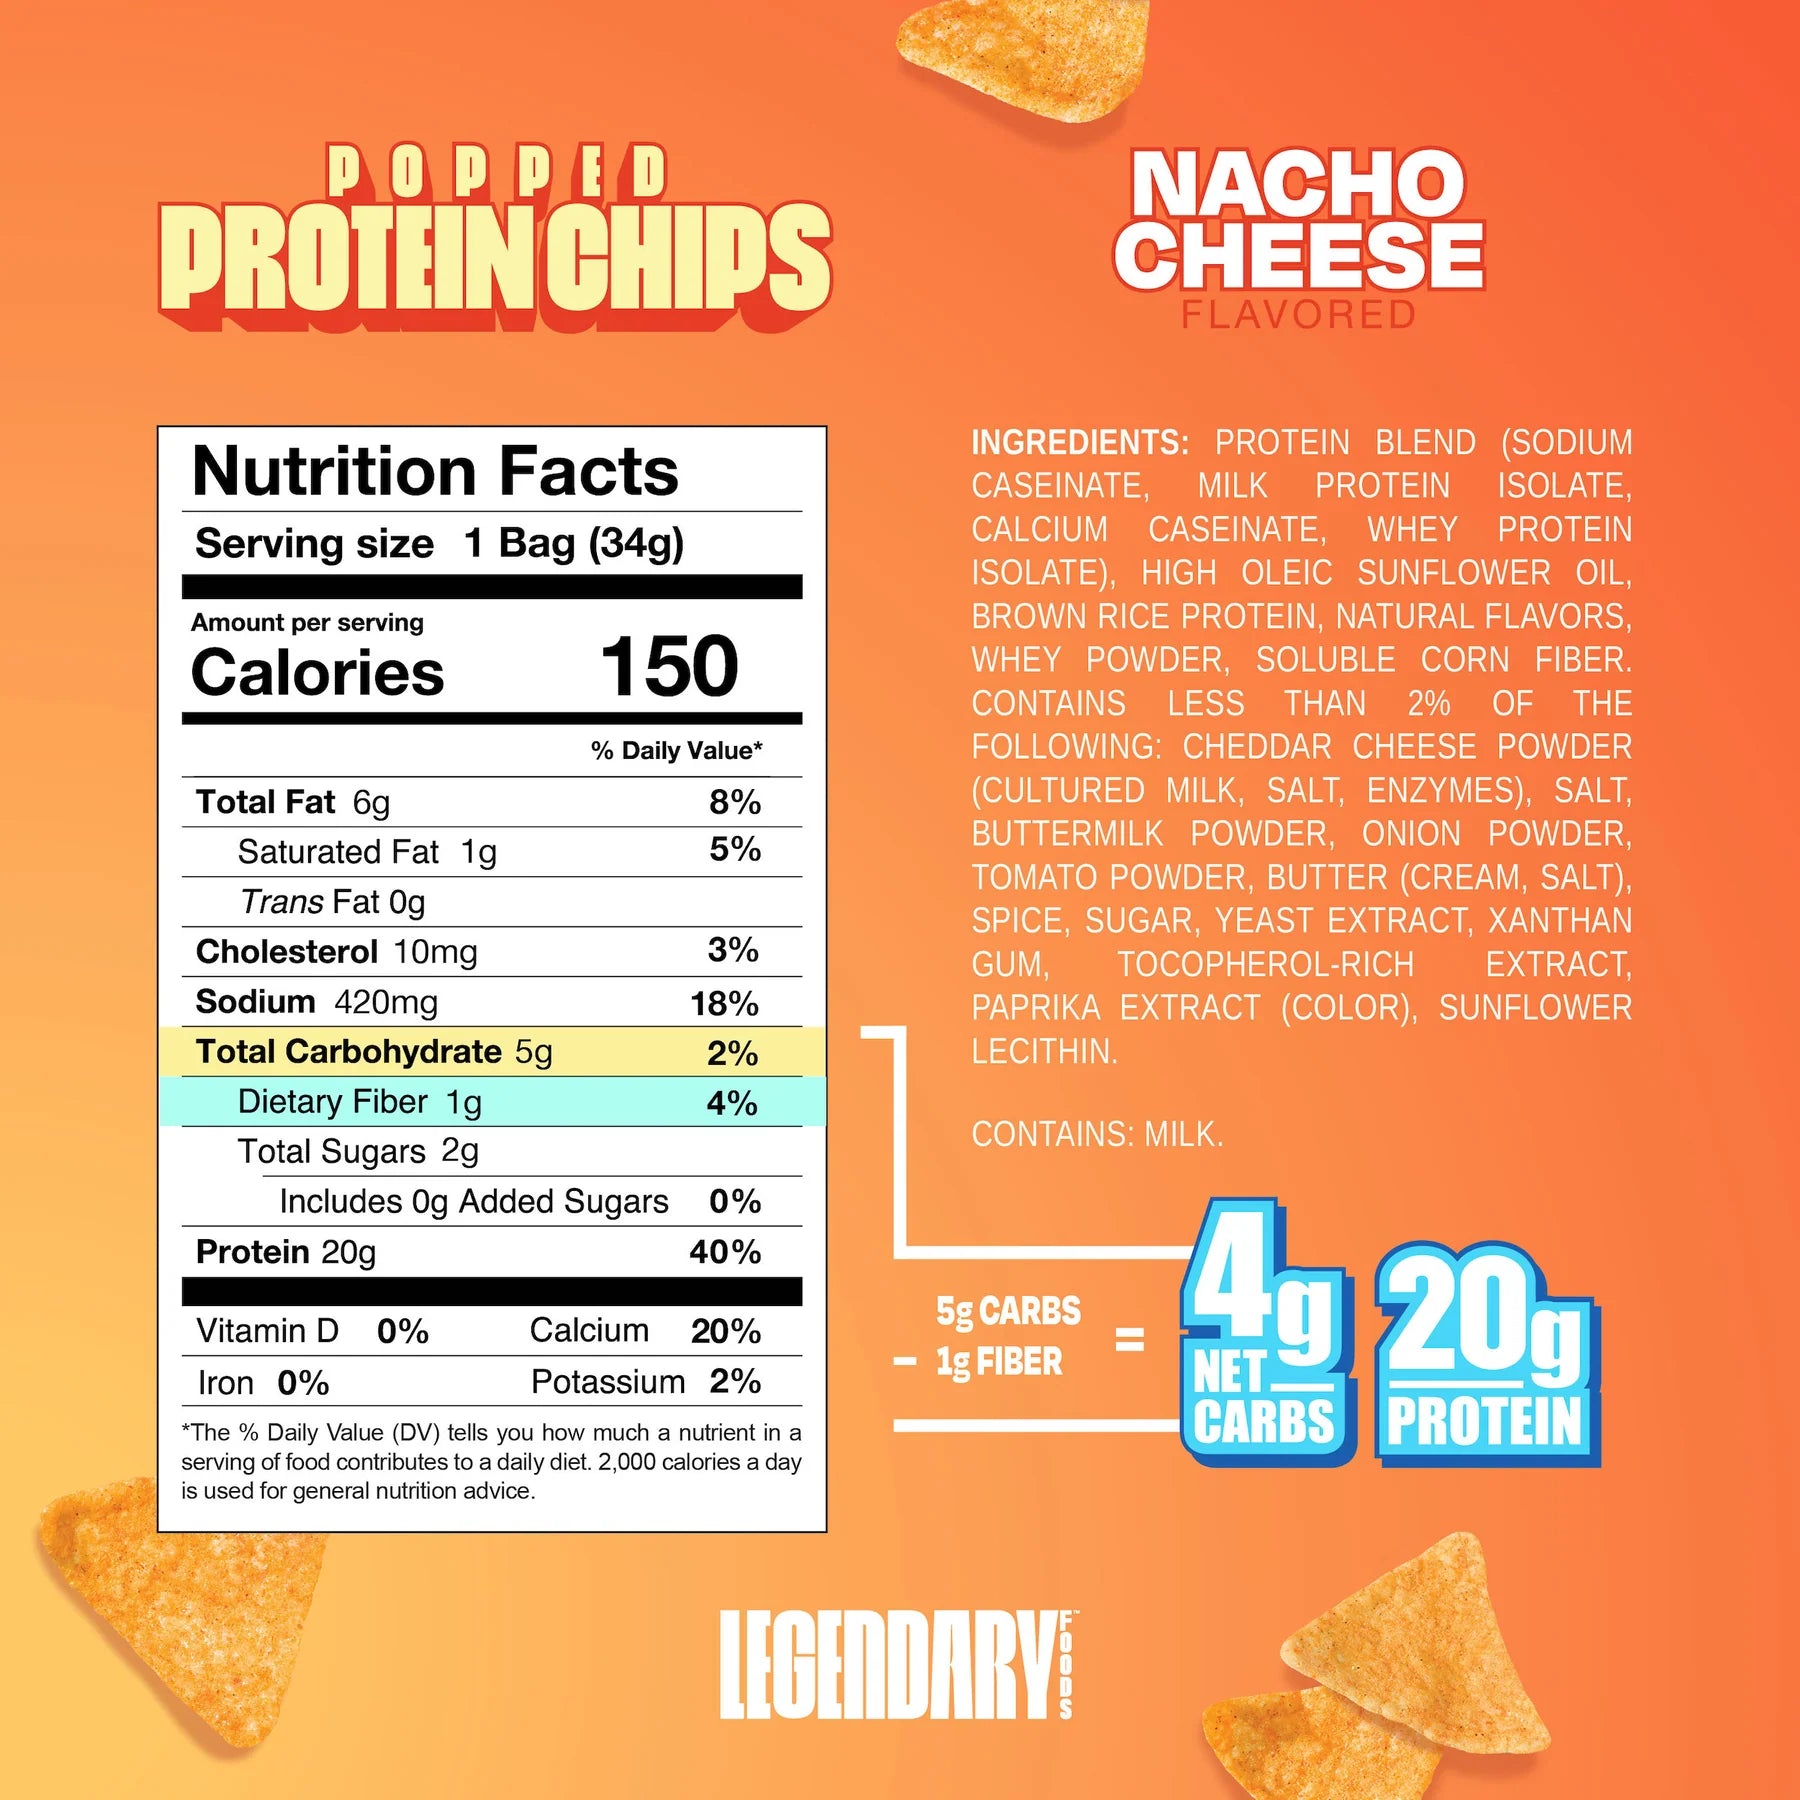 Legendary Foods - Popped Protein Chip - 34g